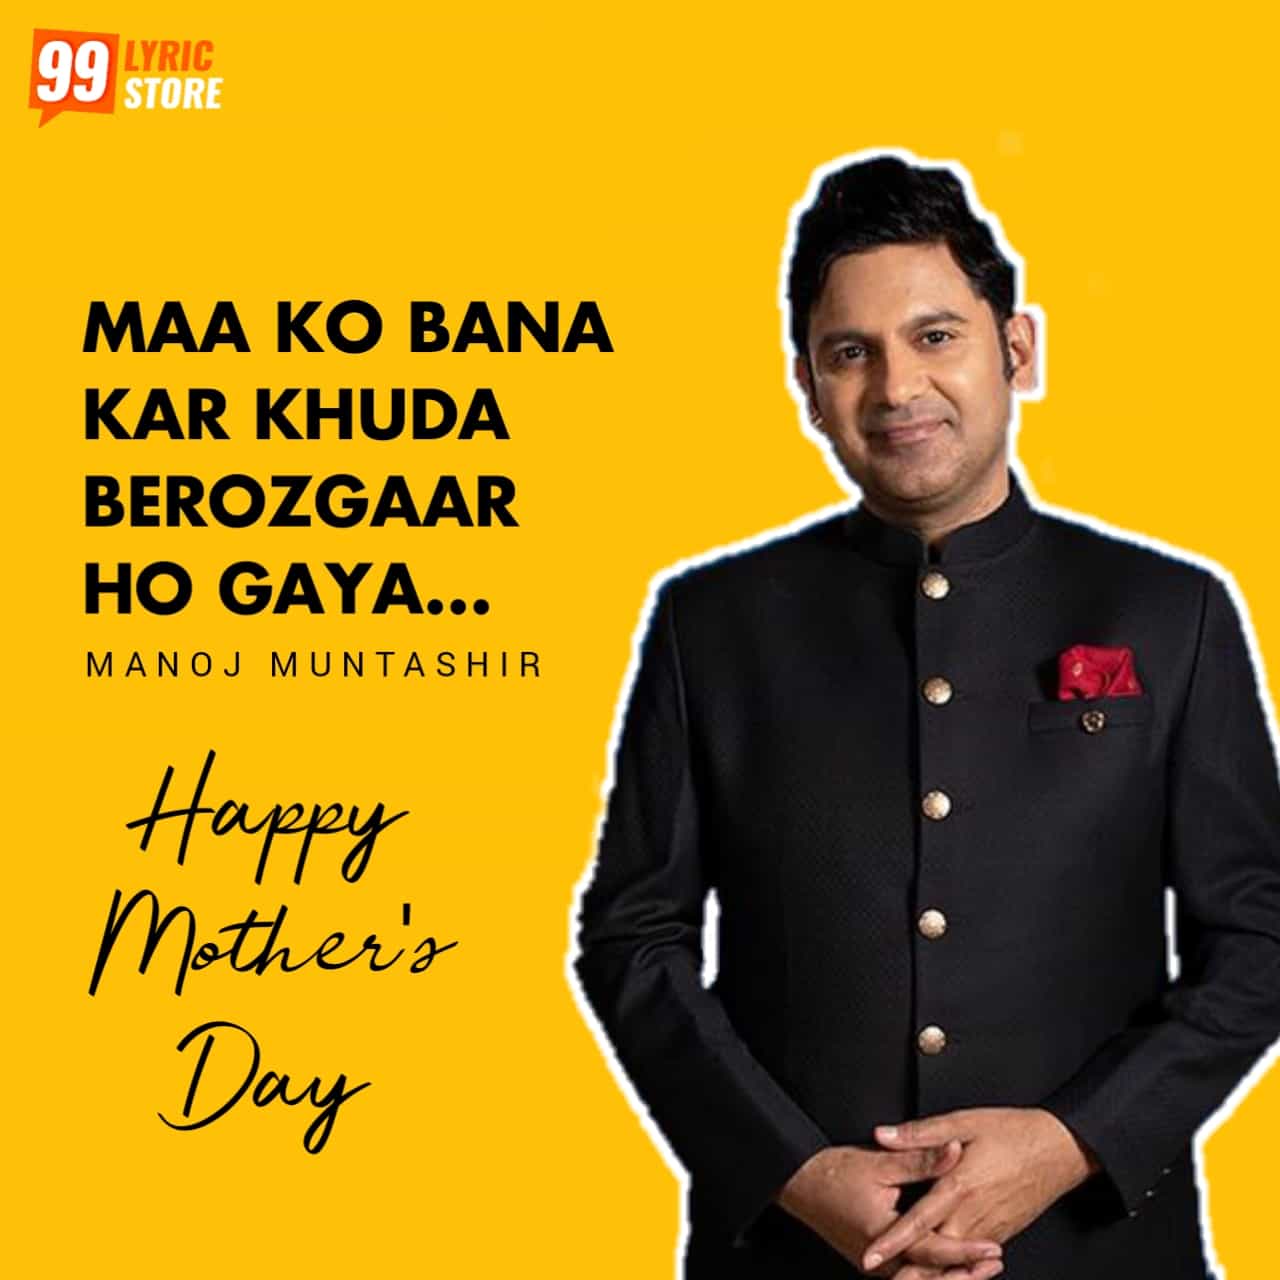 On the biggest occasion of mother's day, indian great and legend lyricist Manoj Muntashir has written a beautiful poem on mother.